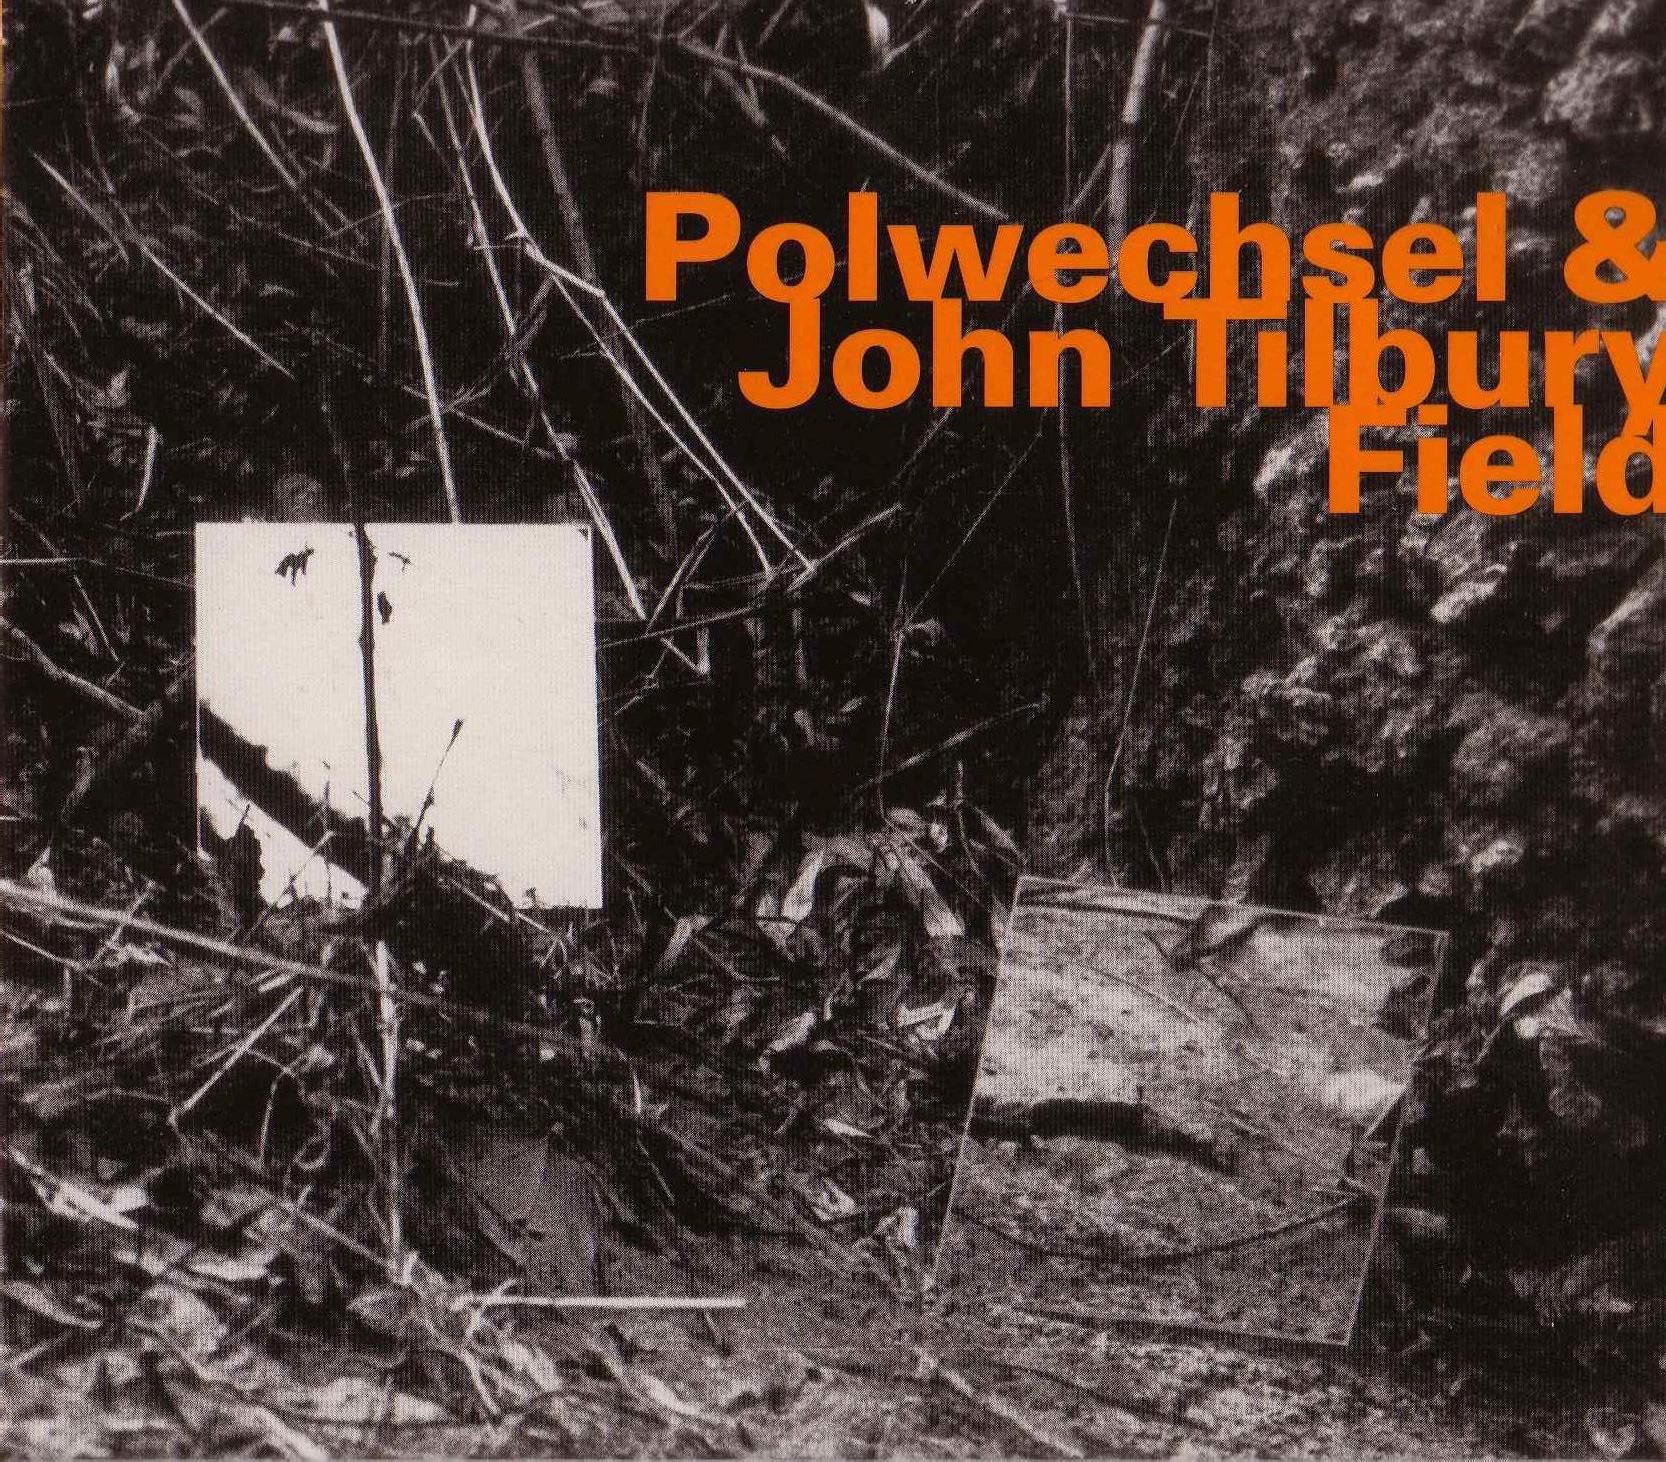 POLWECHSEL - Field - Cover